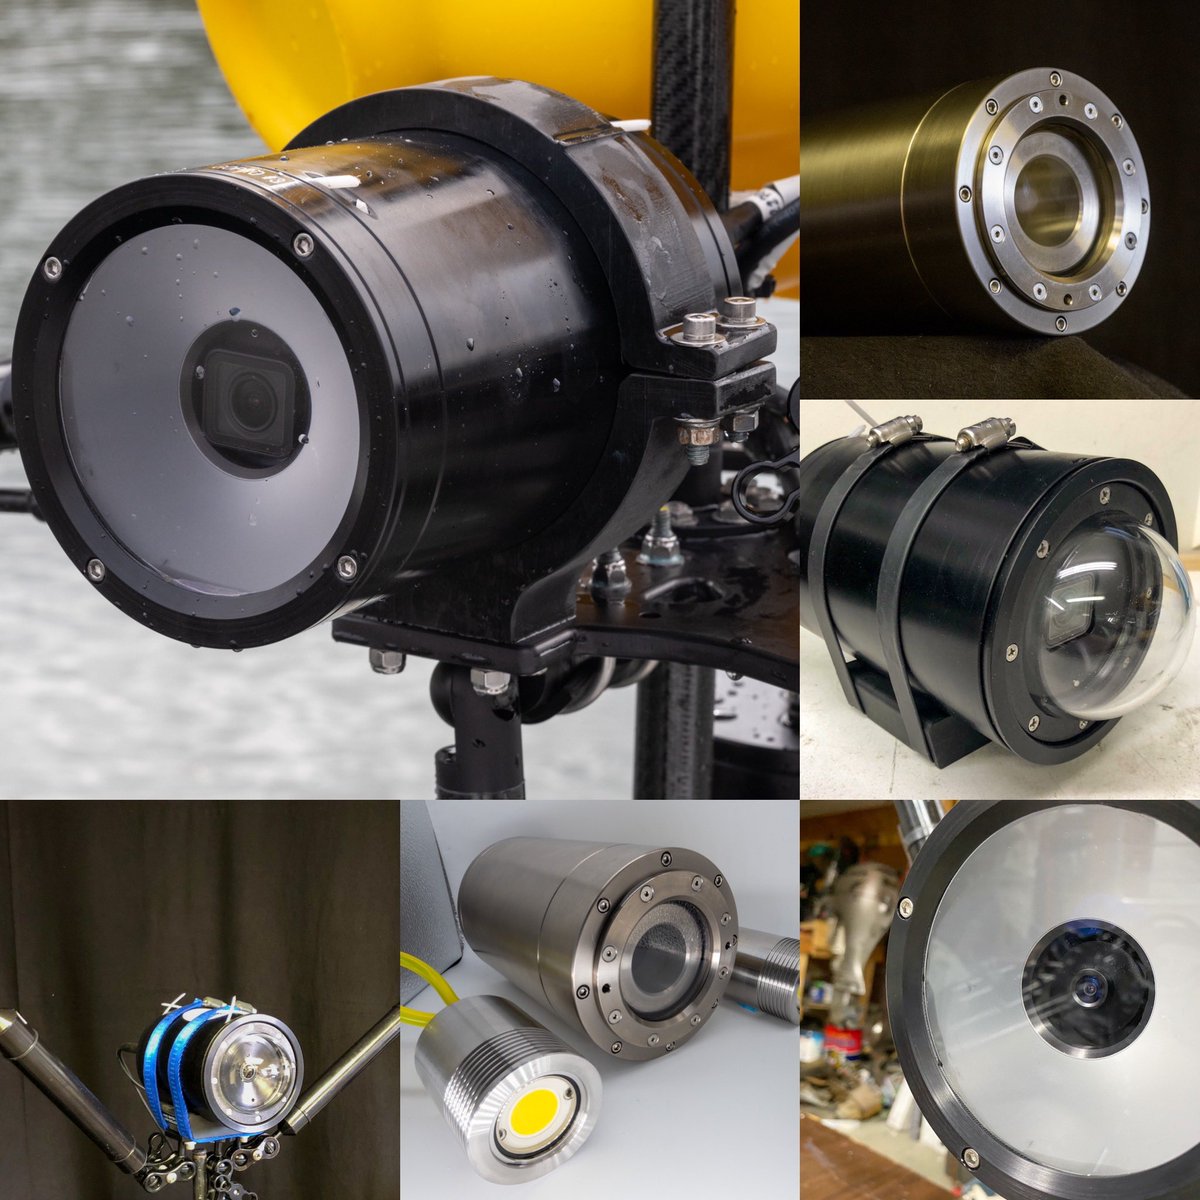 The newest addition to our #goprohousing line, the 1000m housing.  Fits nicely between the 600m and the 4500m housings. #marineresearch #marineimaging #underwatergopro #rovcamera